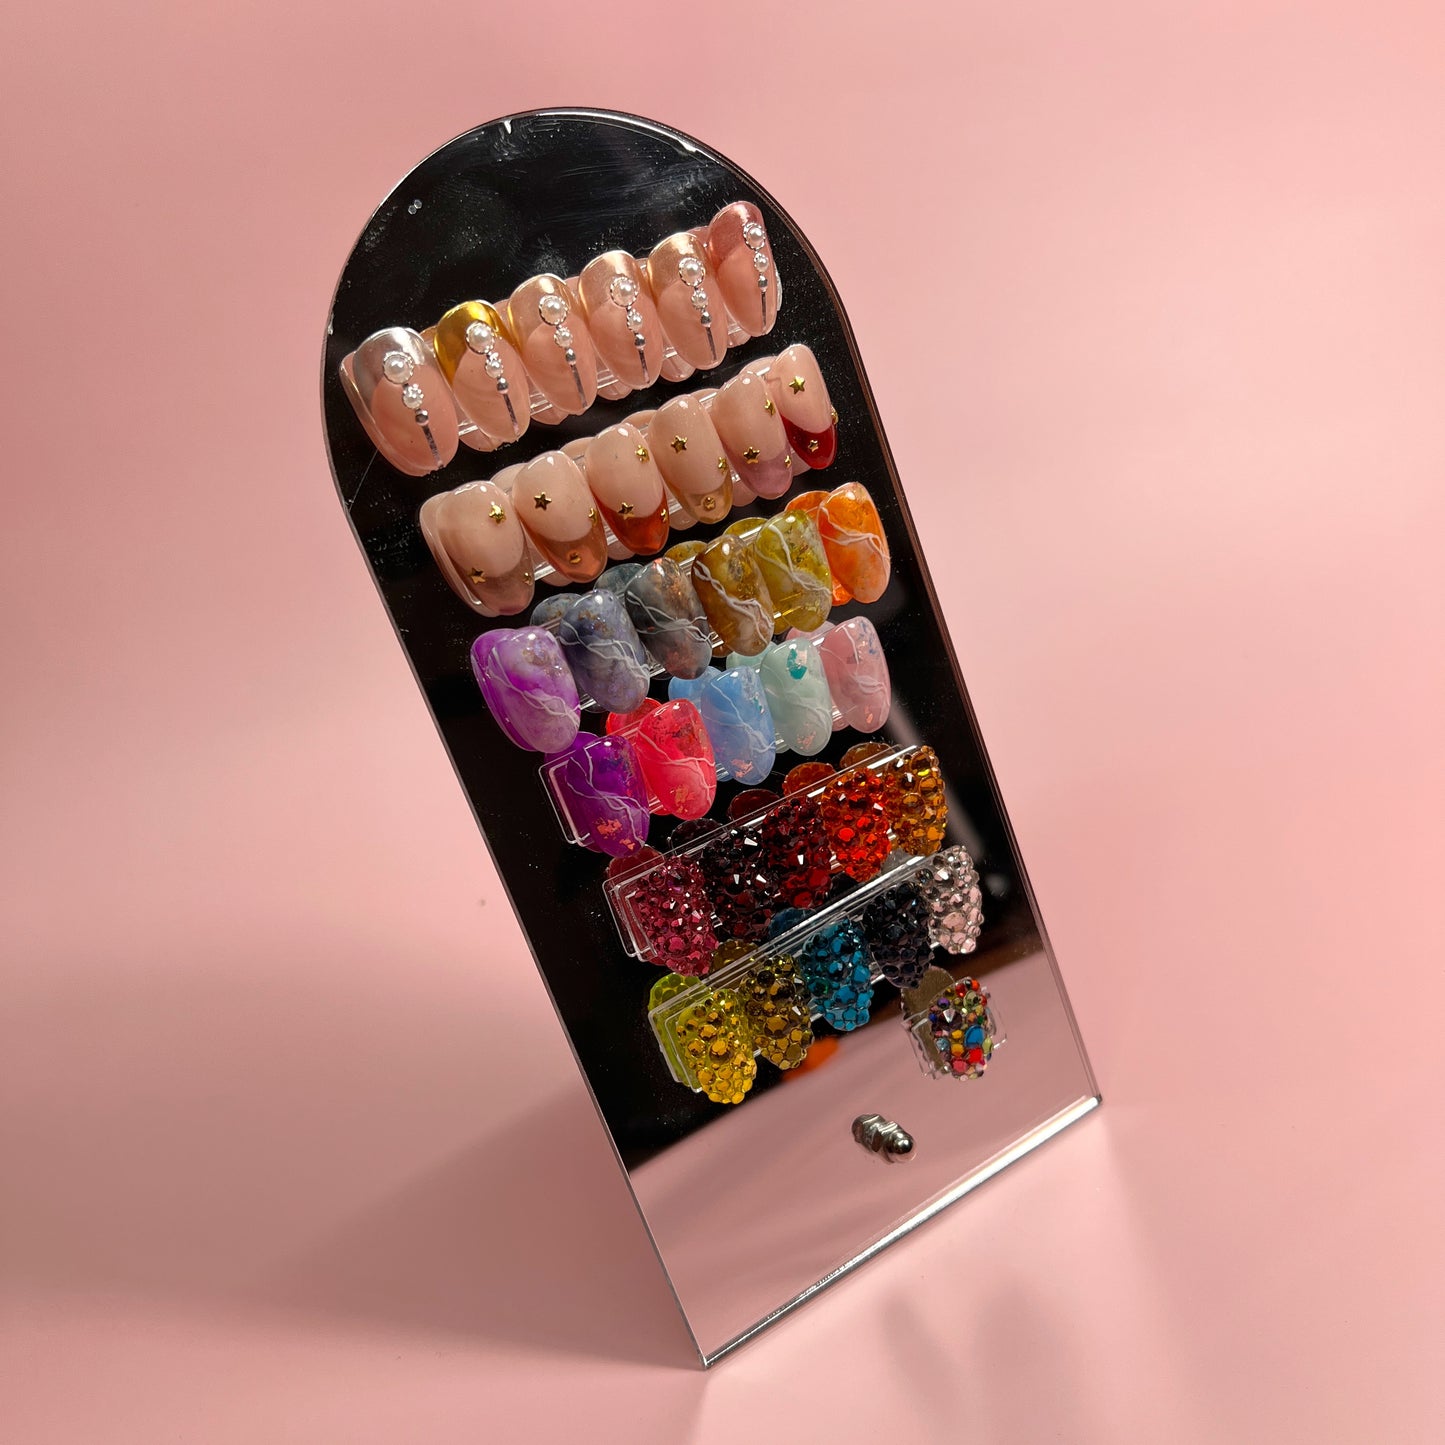 Photo of mirrored nail art display wth tips on pink backdrop. 